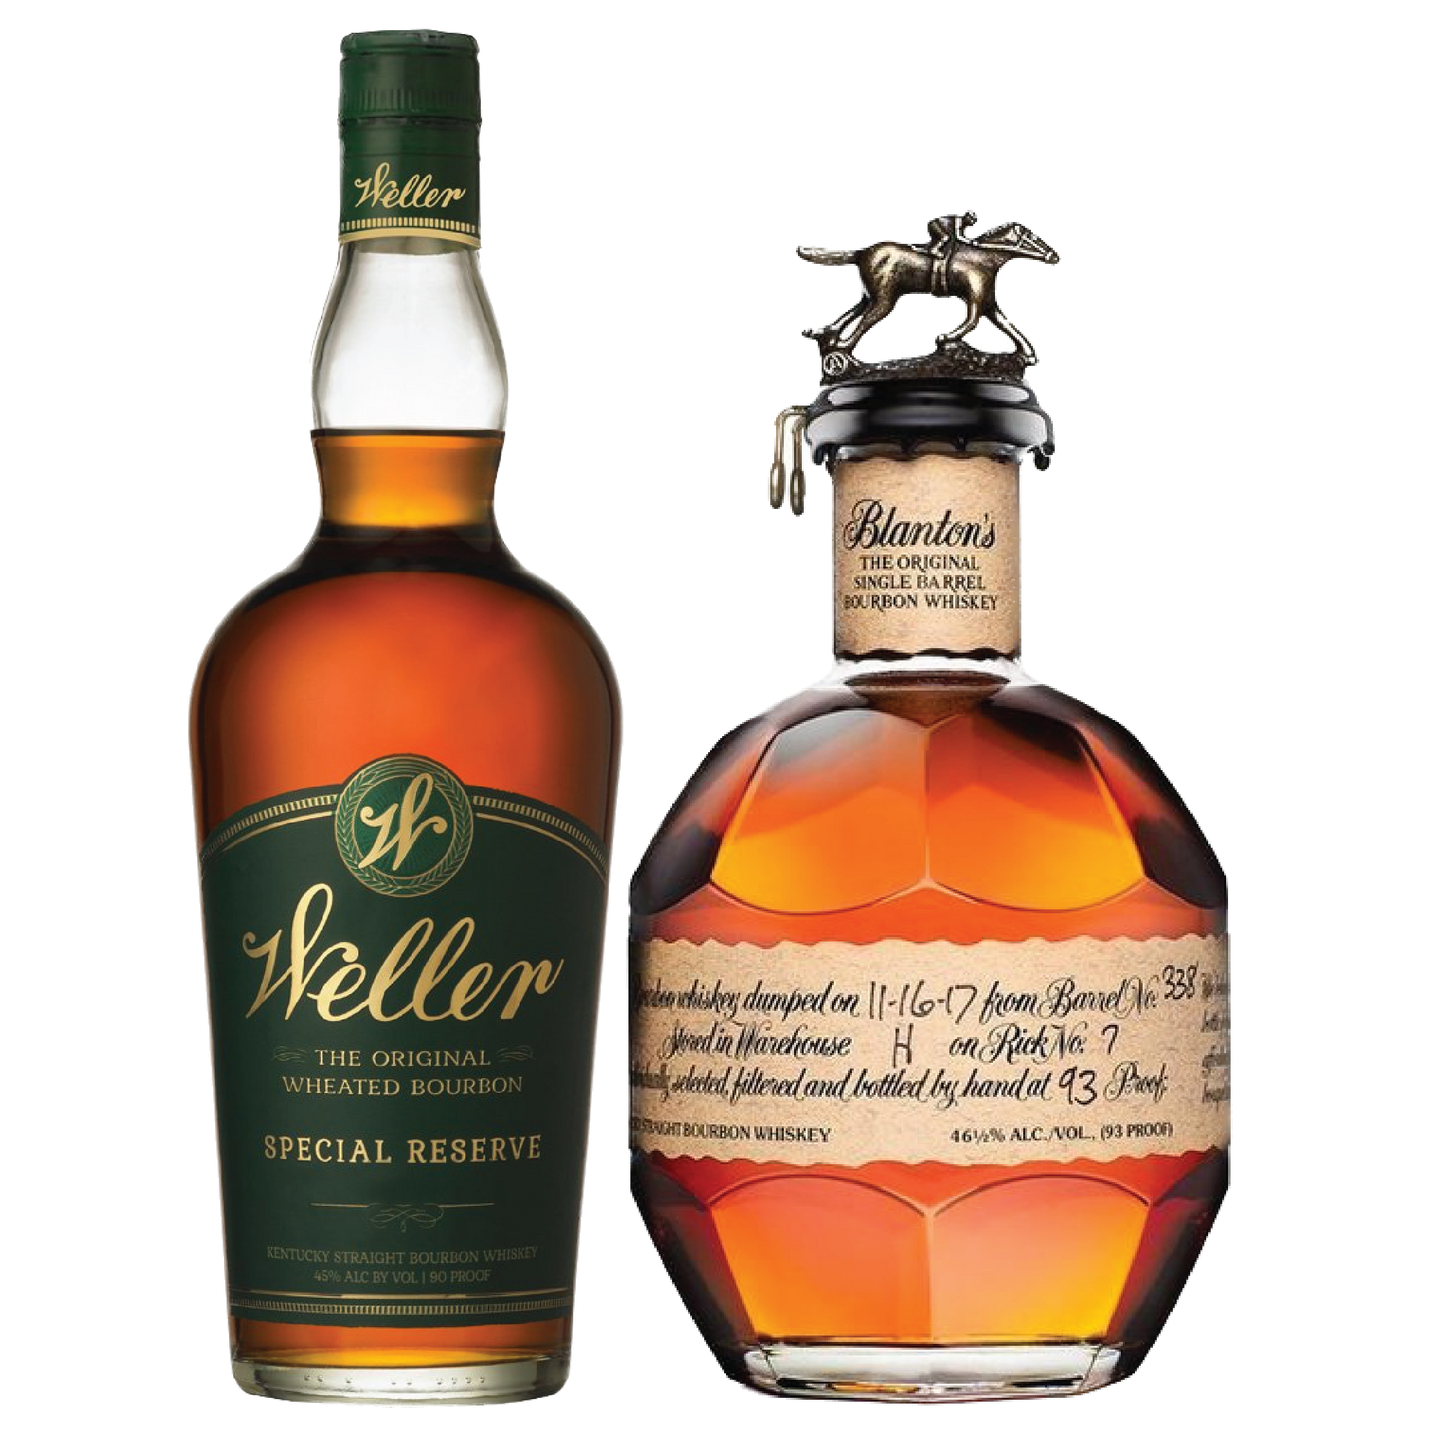 W.L. Weller and Blanton's Package